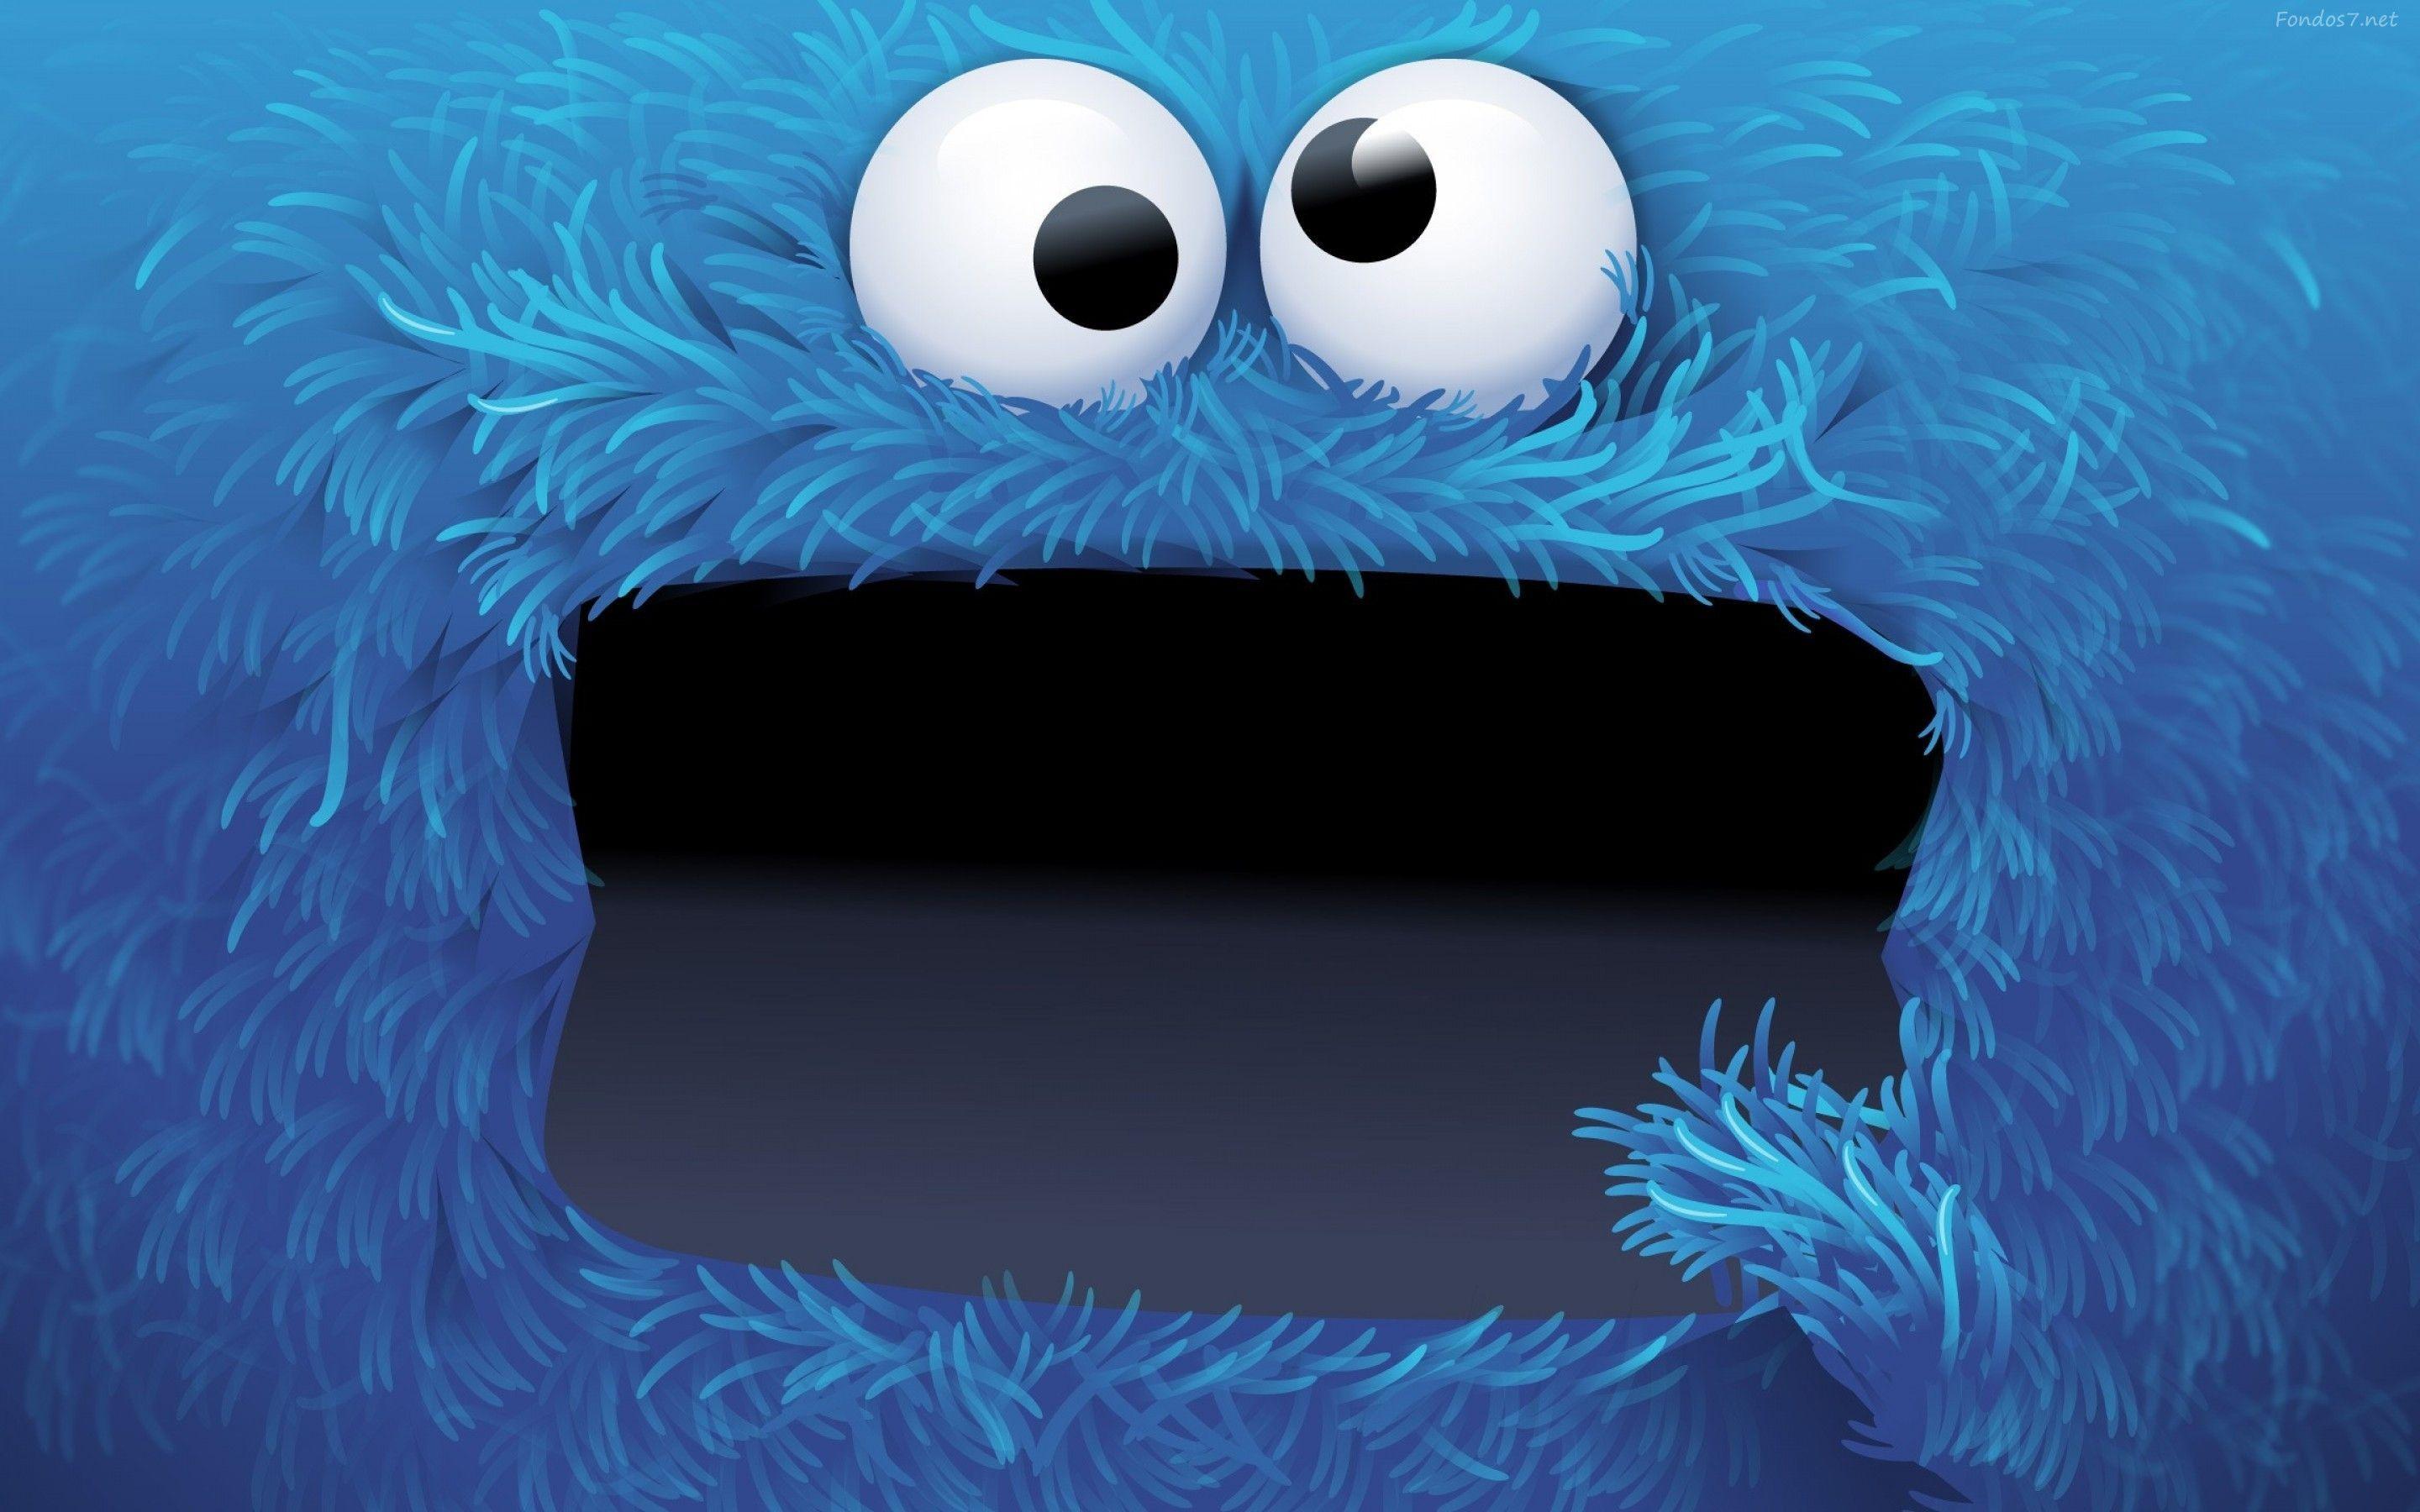 Cookie Monster Wallpaper, Awesome 46 Cookie Monster Wallpaper. HD